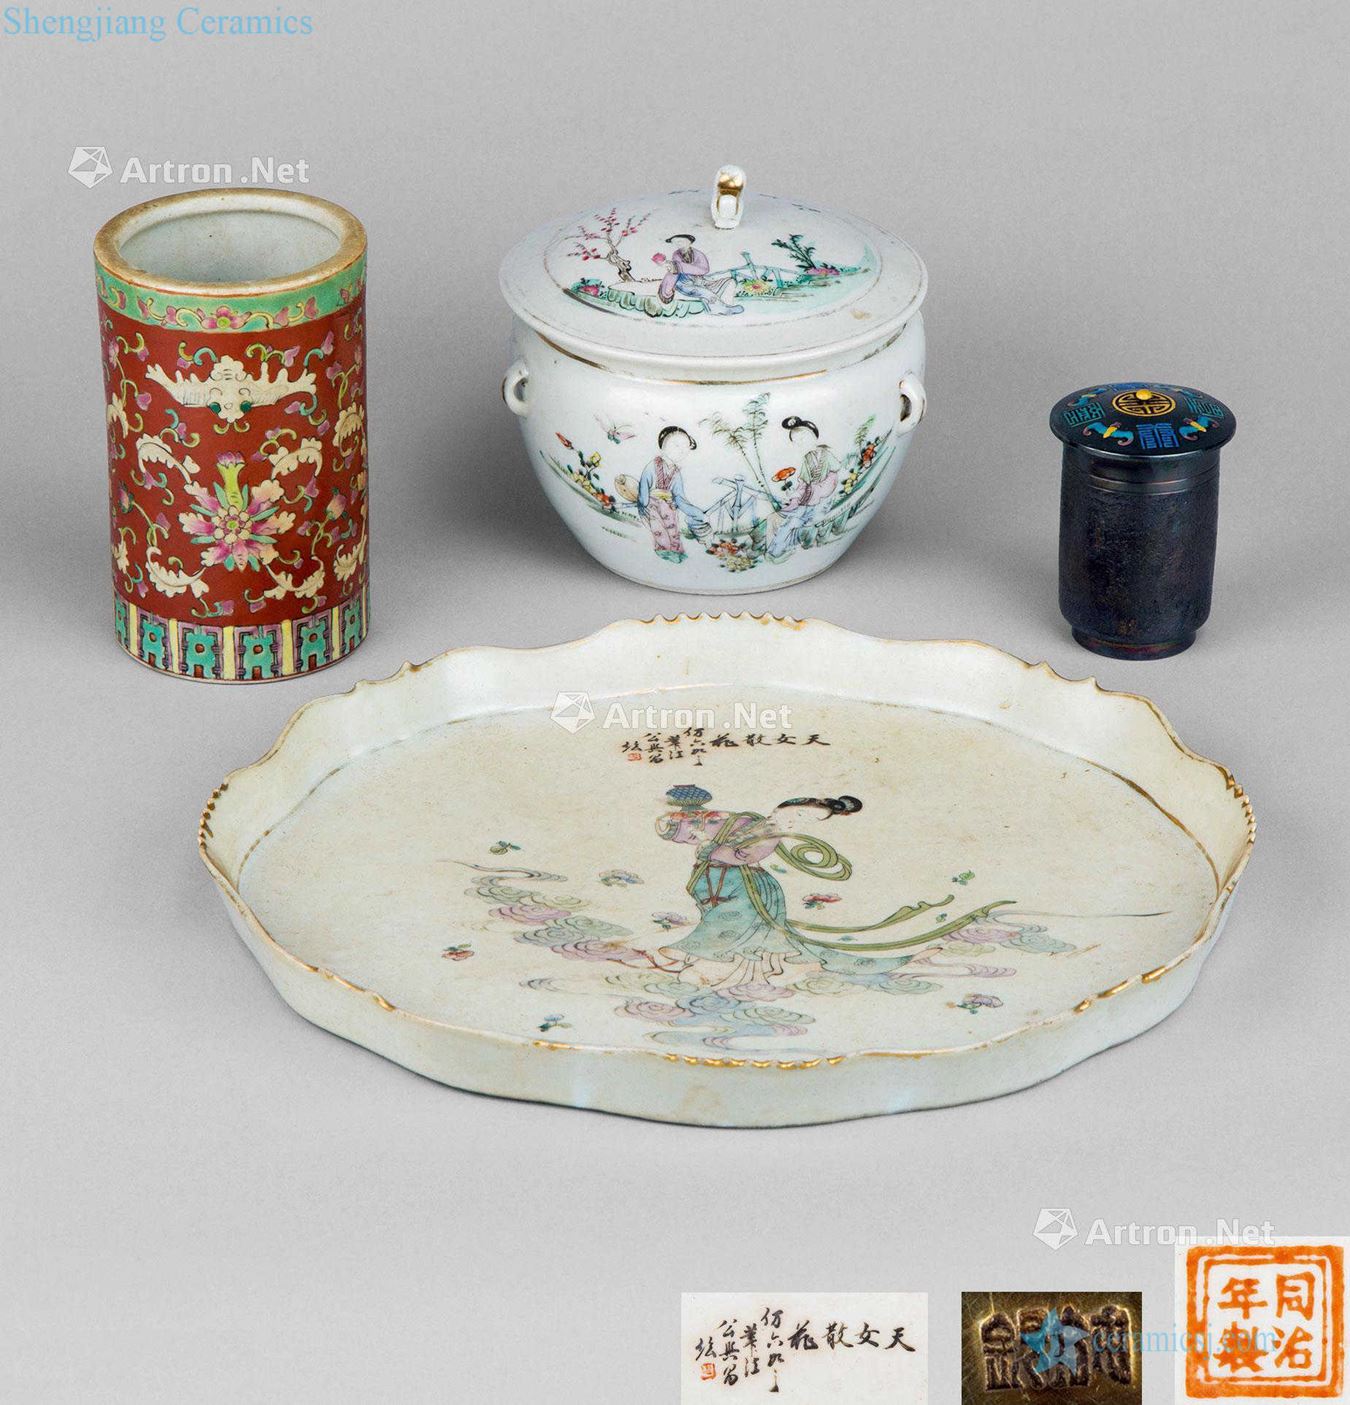 In the qing dynasty (1644-1911) powder enamel split of plate Flower pattern brush pot Traditional Chinese lines cover pot Live sycee cover tank (four)